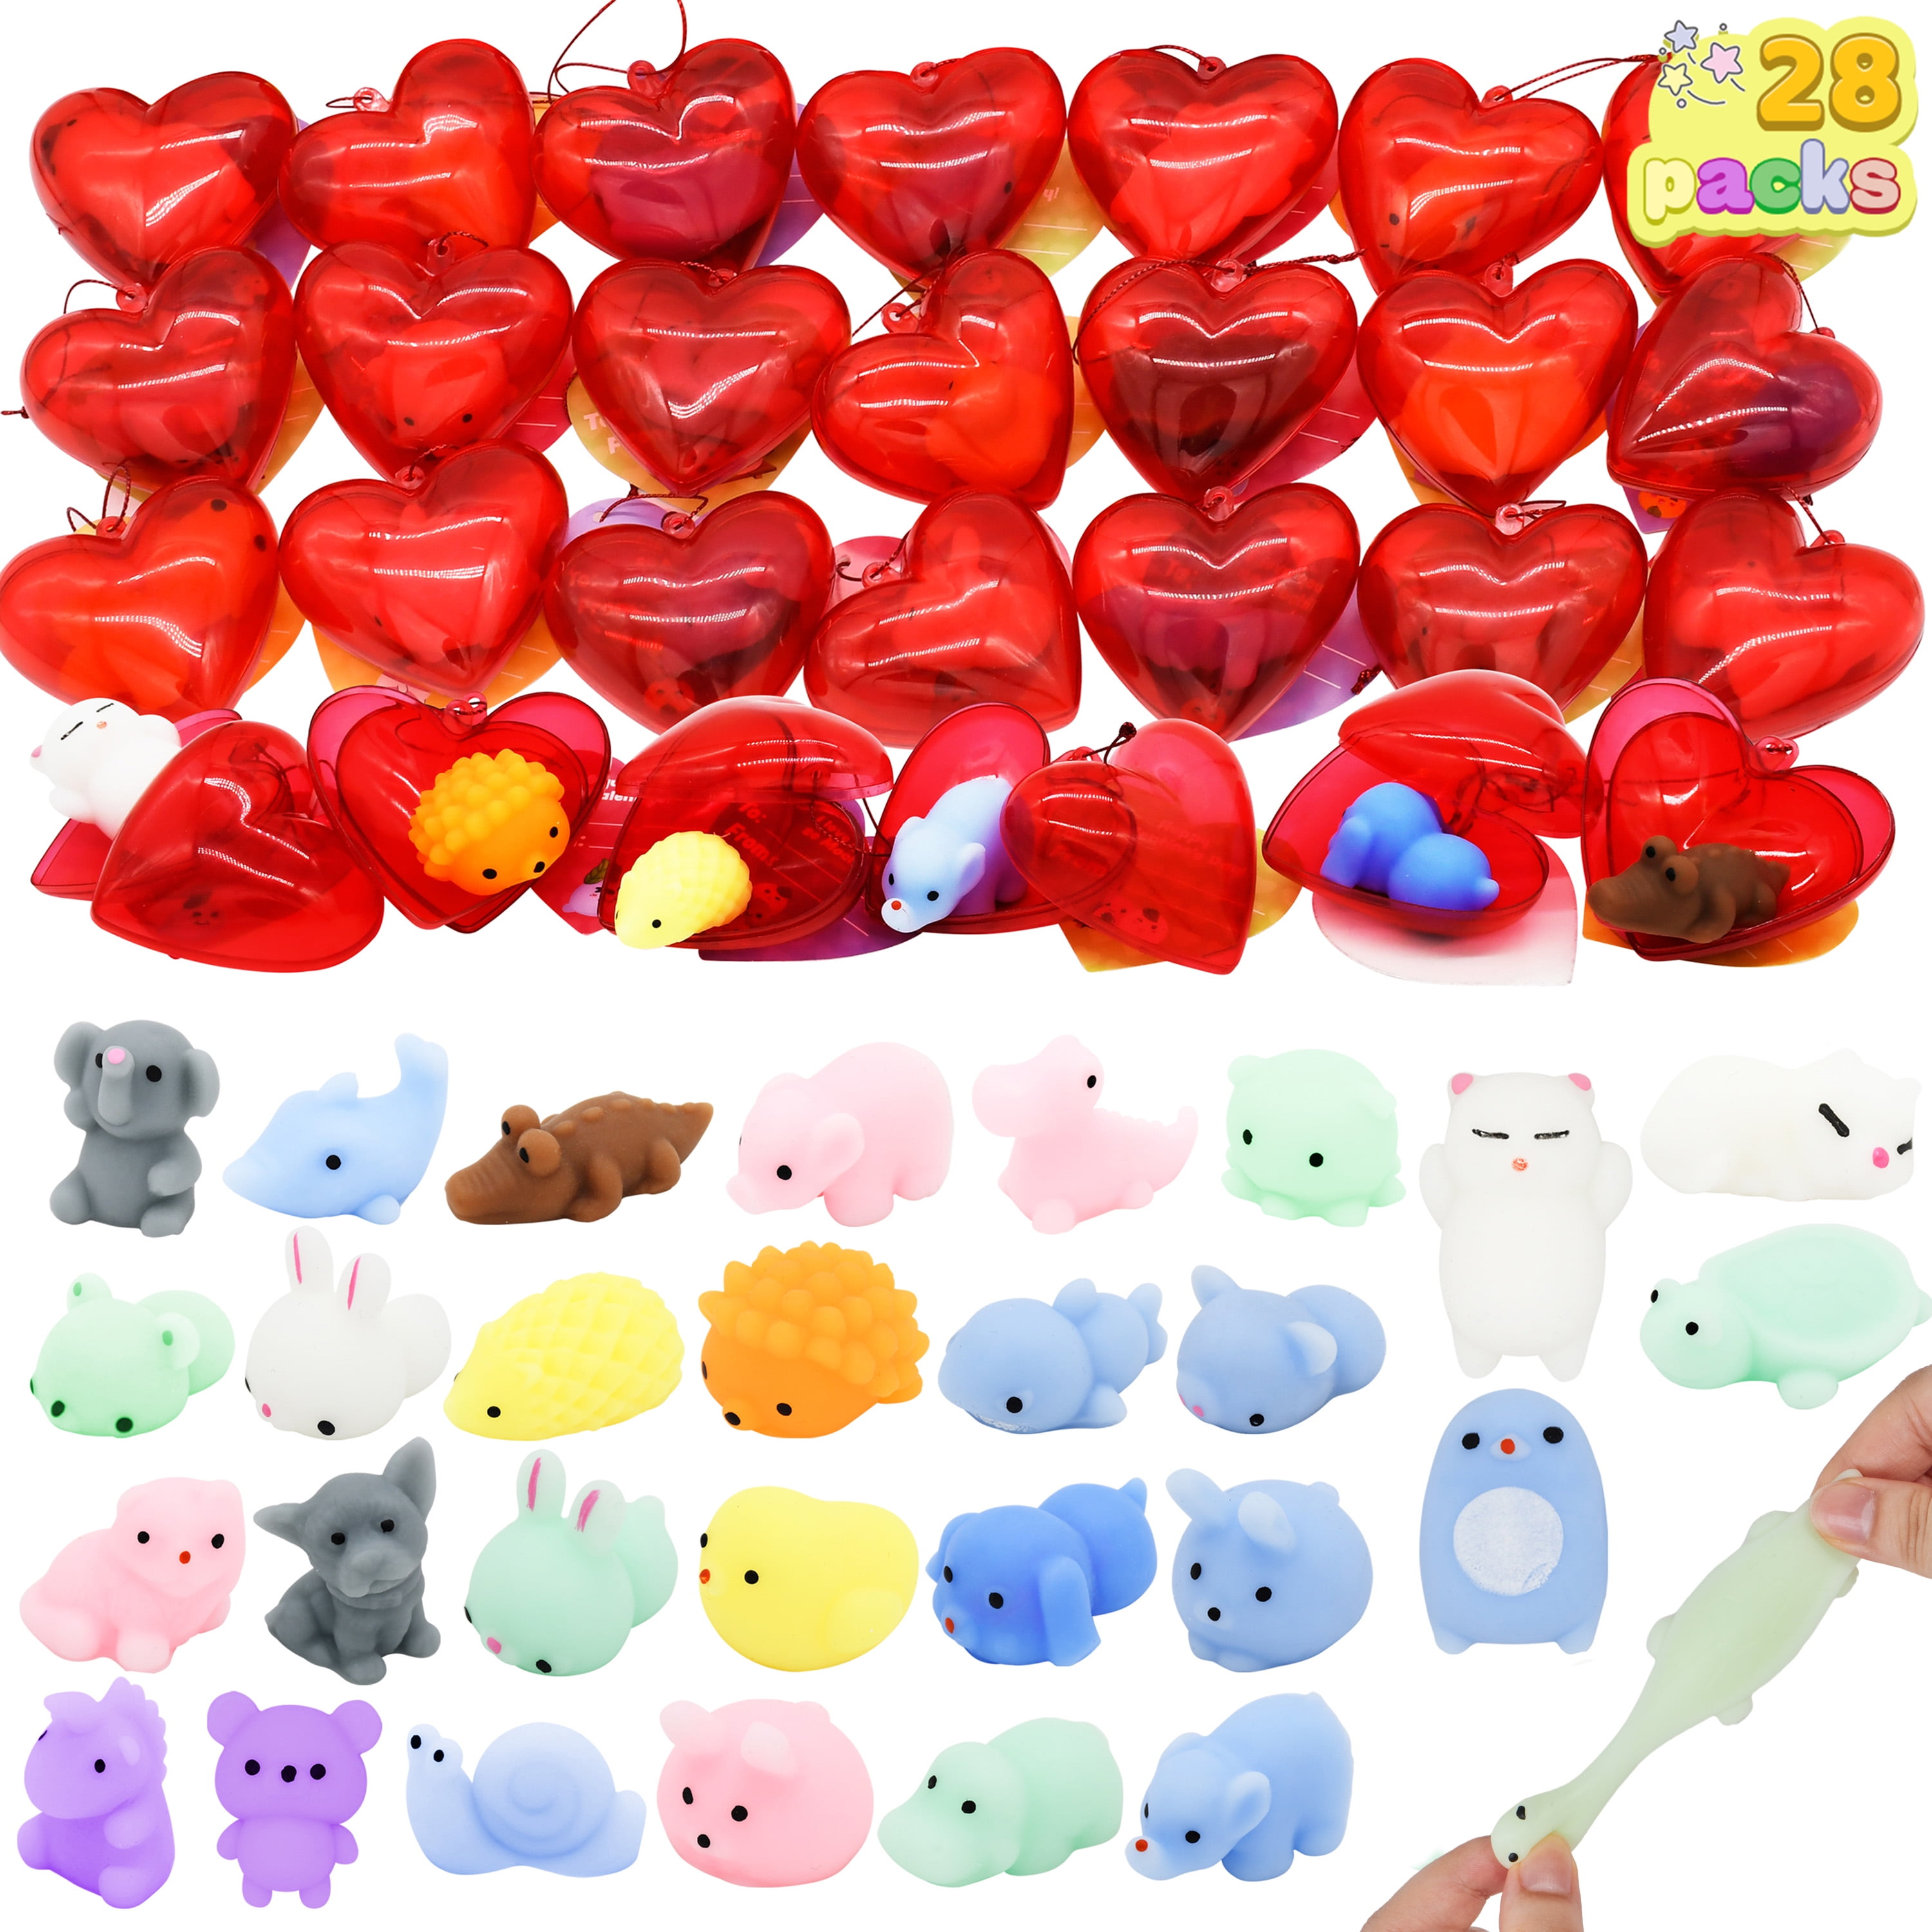 BT21 Squishy Capsule Toy (Series 2 - Sushi) Cute Soft Mini Fidget Stuffer  for Boys Girls Adults and Children as Gift Birthday Party Basket Filler  Stress Relief - 1 Pc 